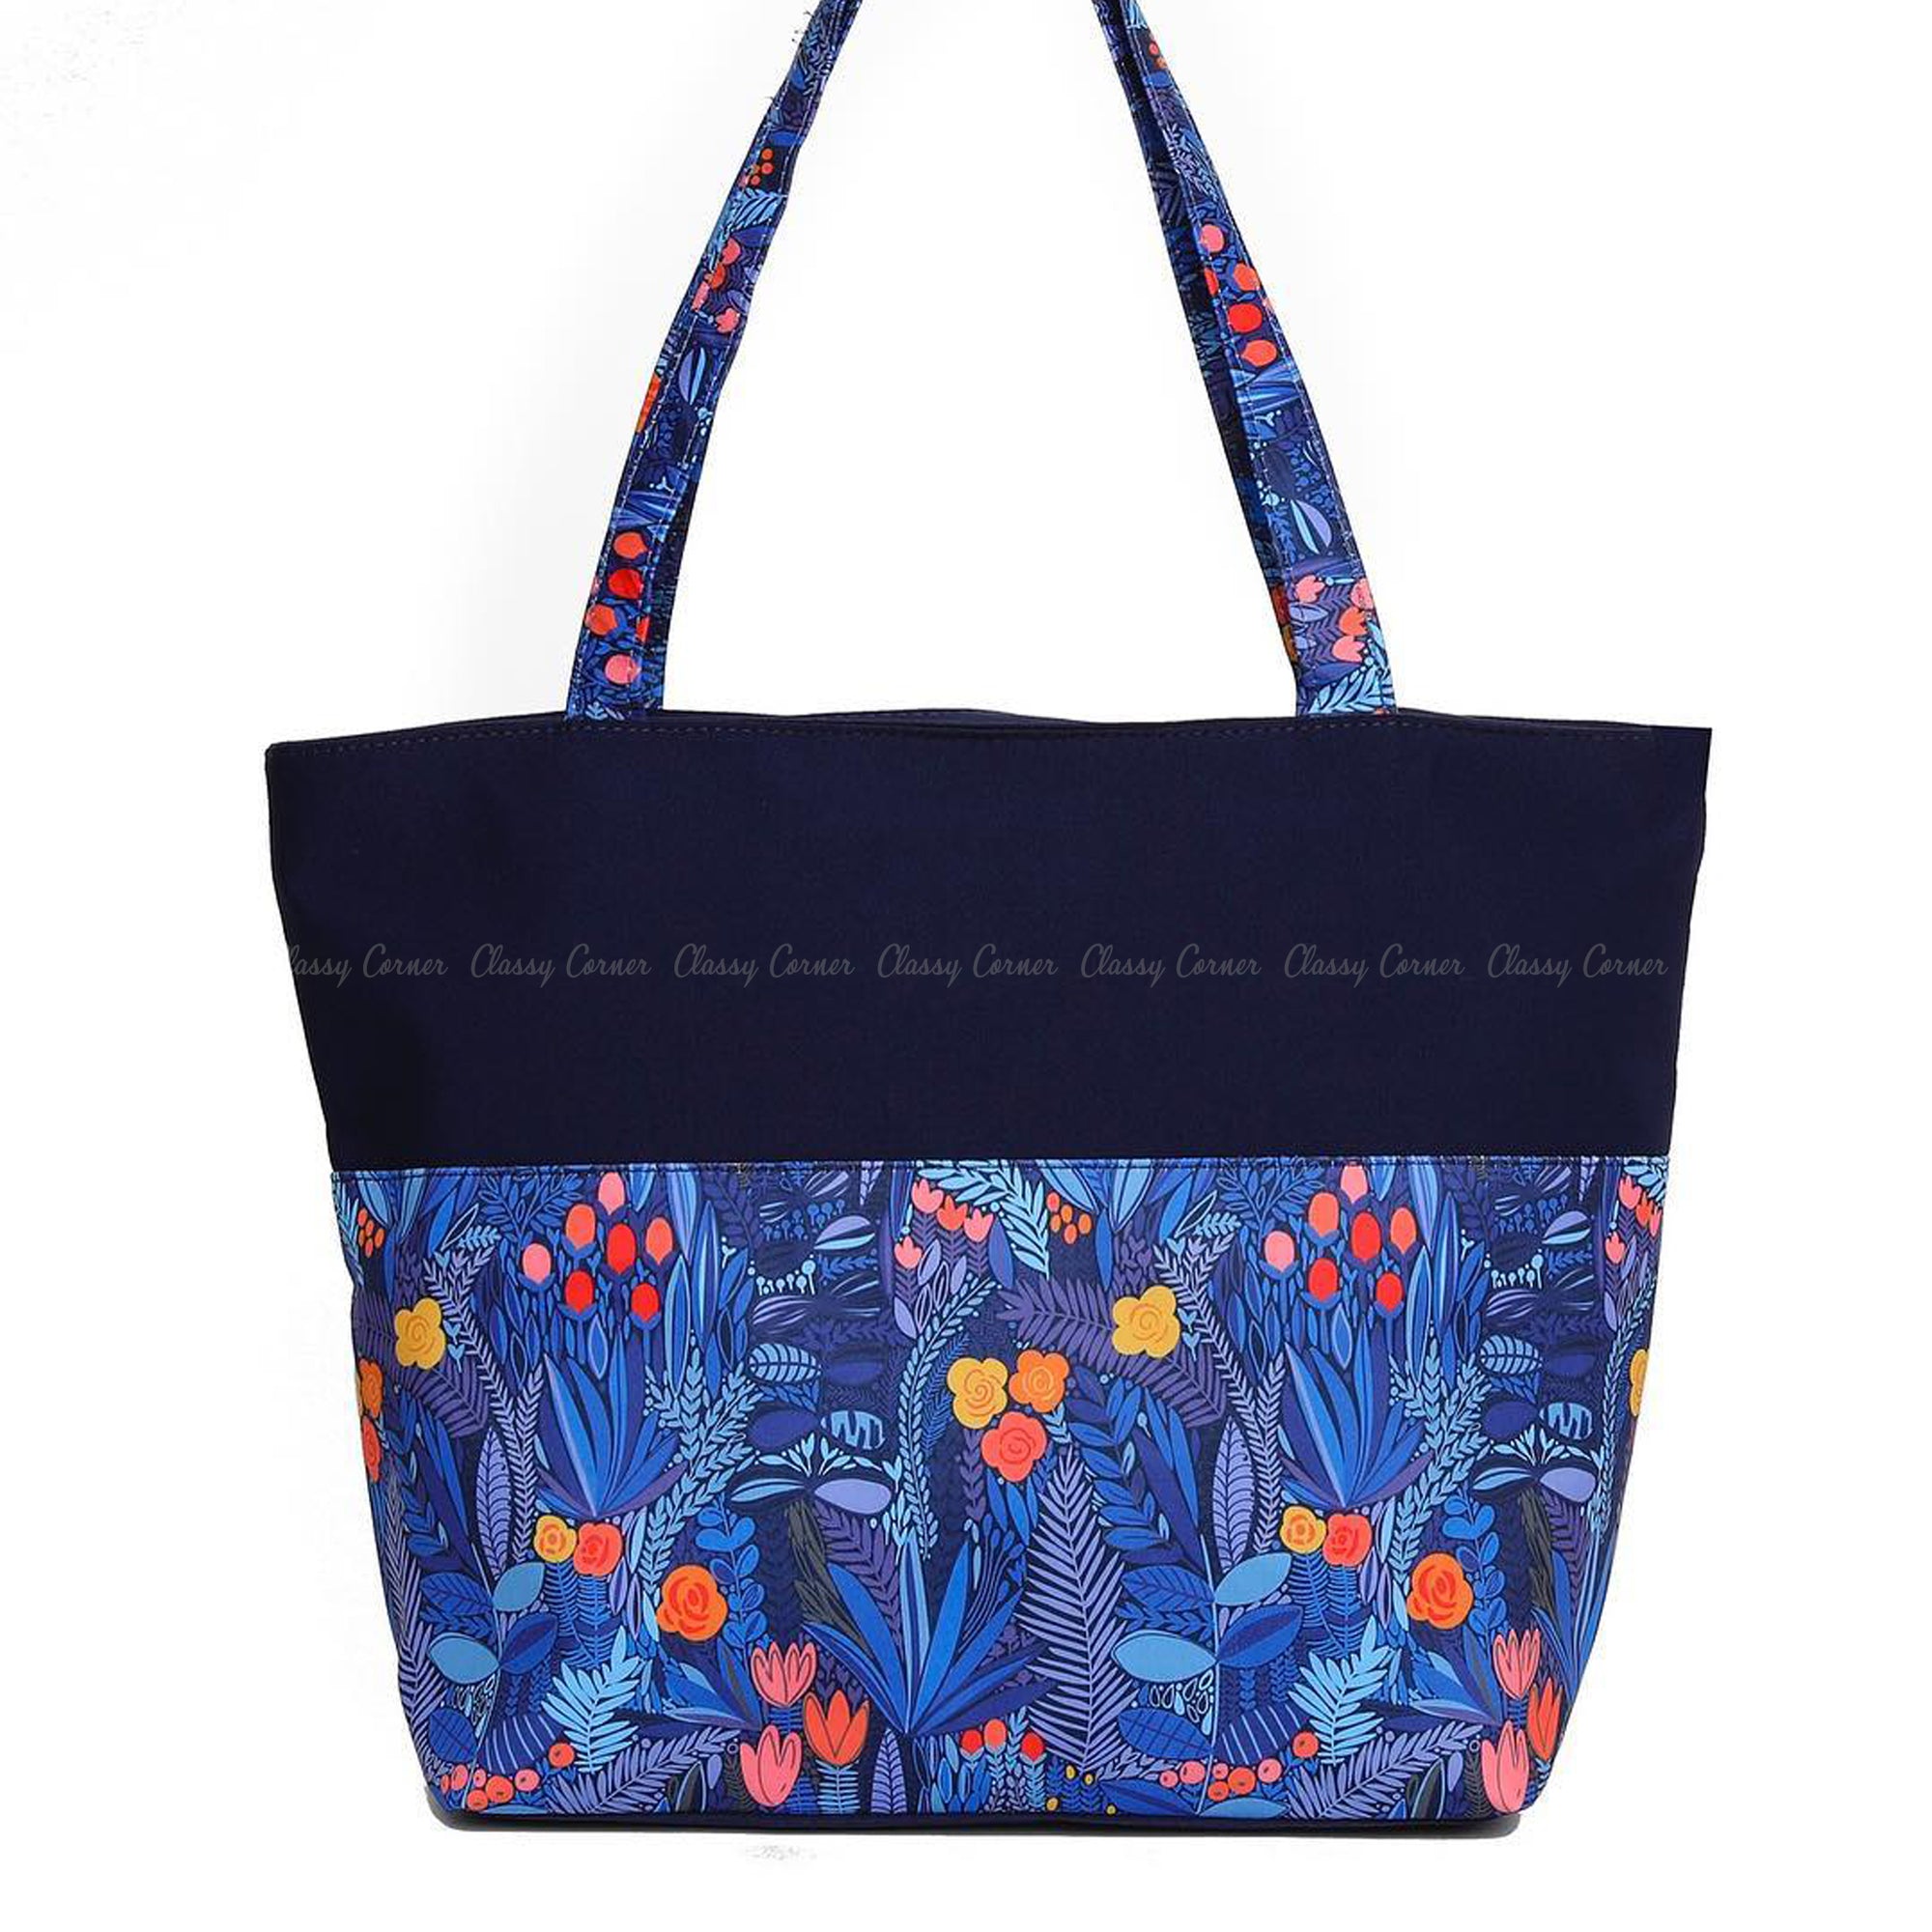 Multicolour Floral Leafy Print with Zipper Navy Blue Beach Tote Bag